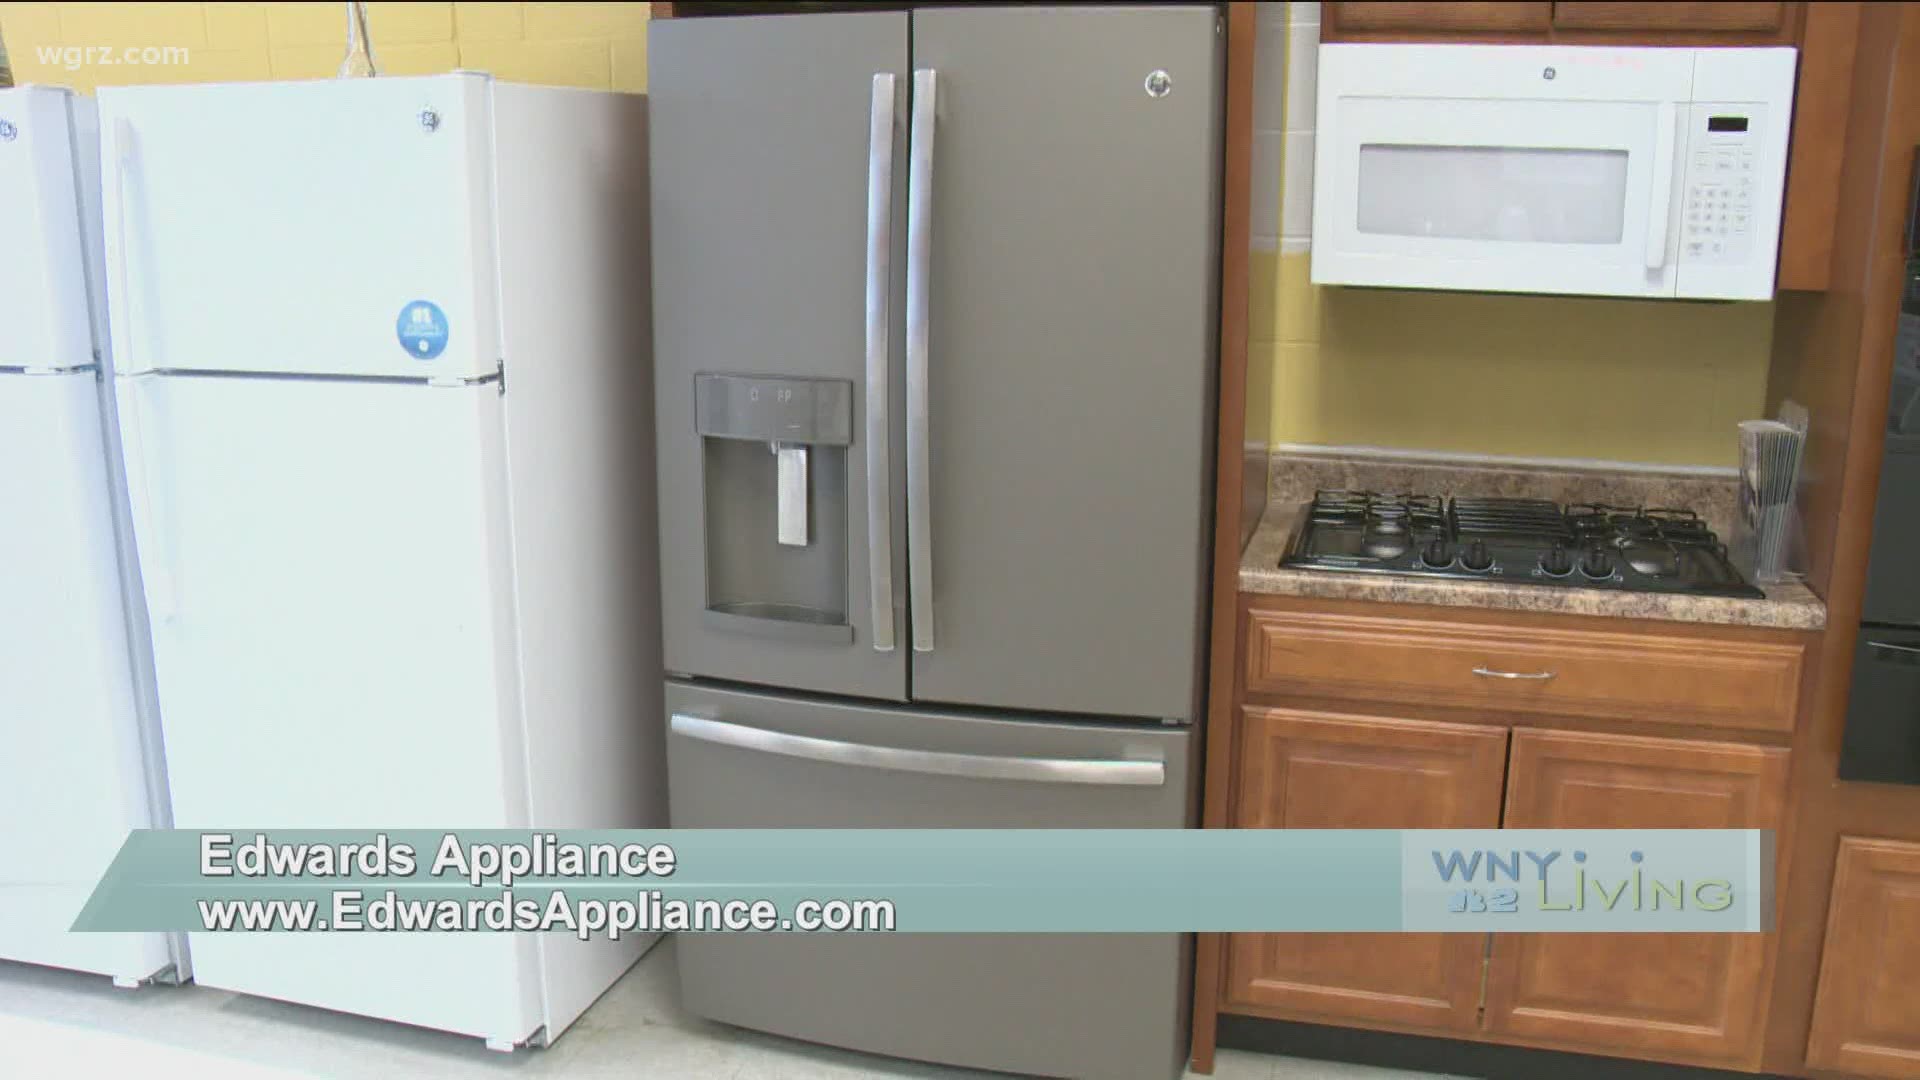 WNY Living - October 3 - Edwards Appliance (THIS VIDEO IS SPONSORED BY EDWARDS APPLIANCE)